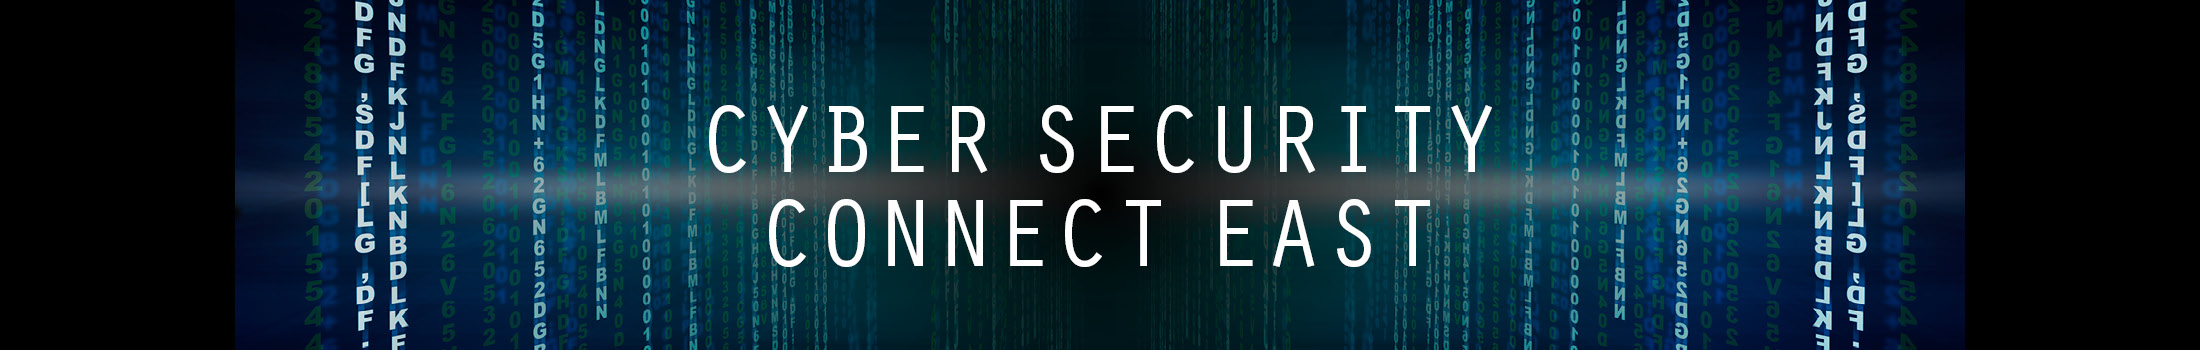 Cyber Security Connect East